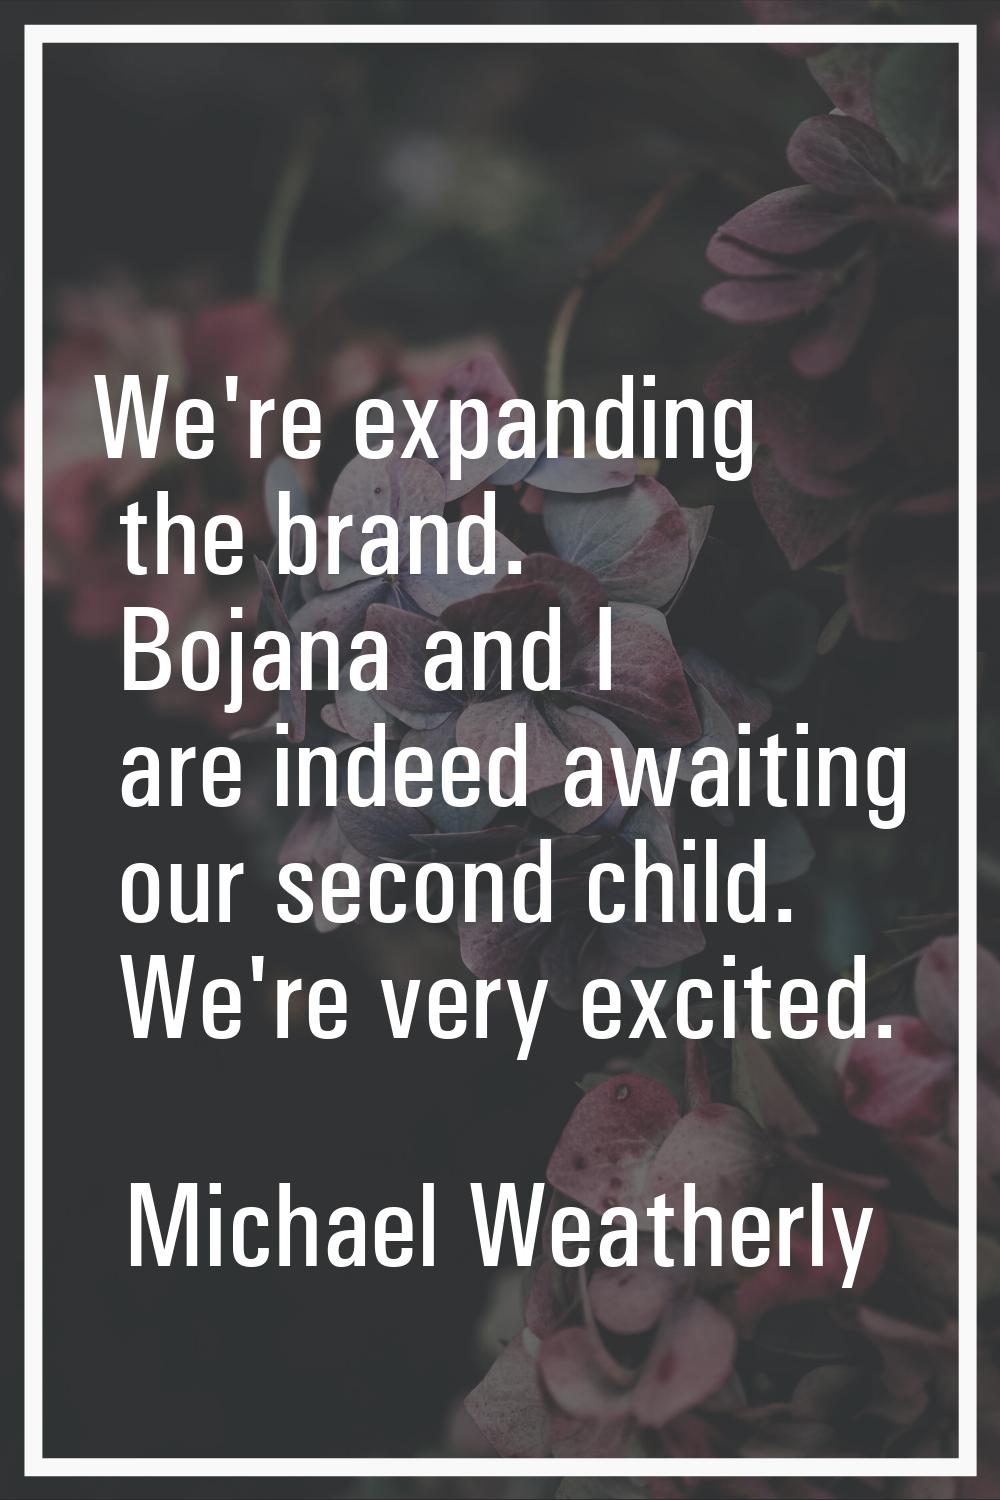 We're expanding the brand. Bojana and I are indeed awaiting our second child. We're very excited.